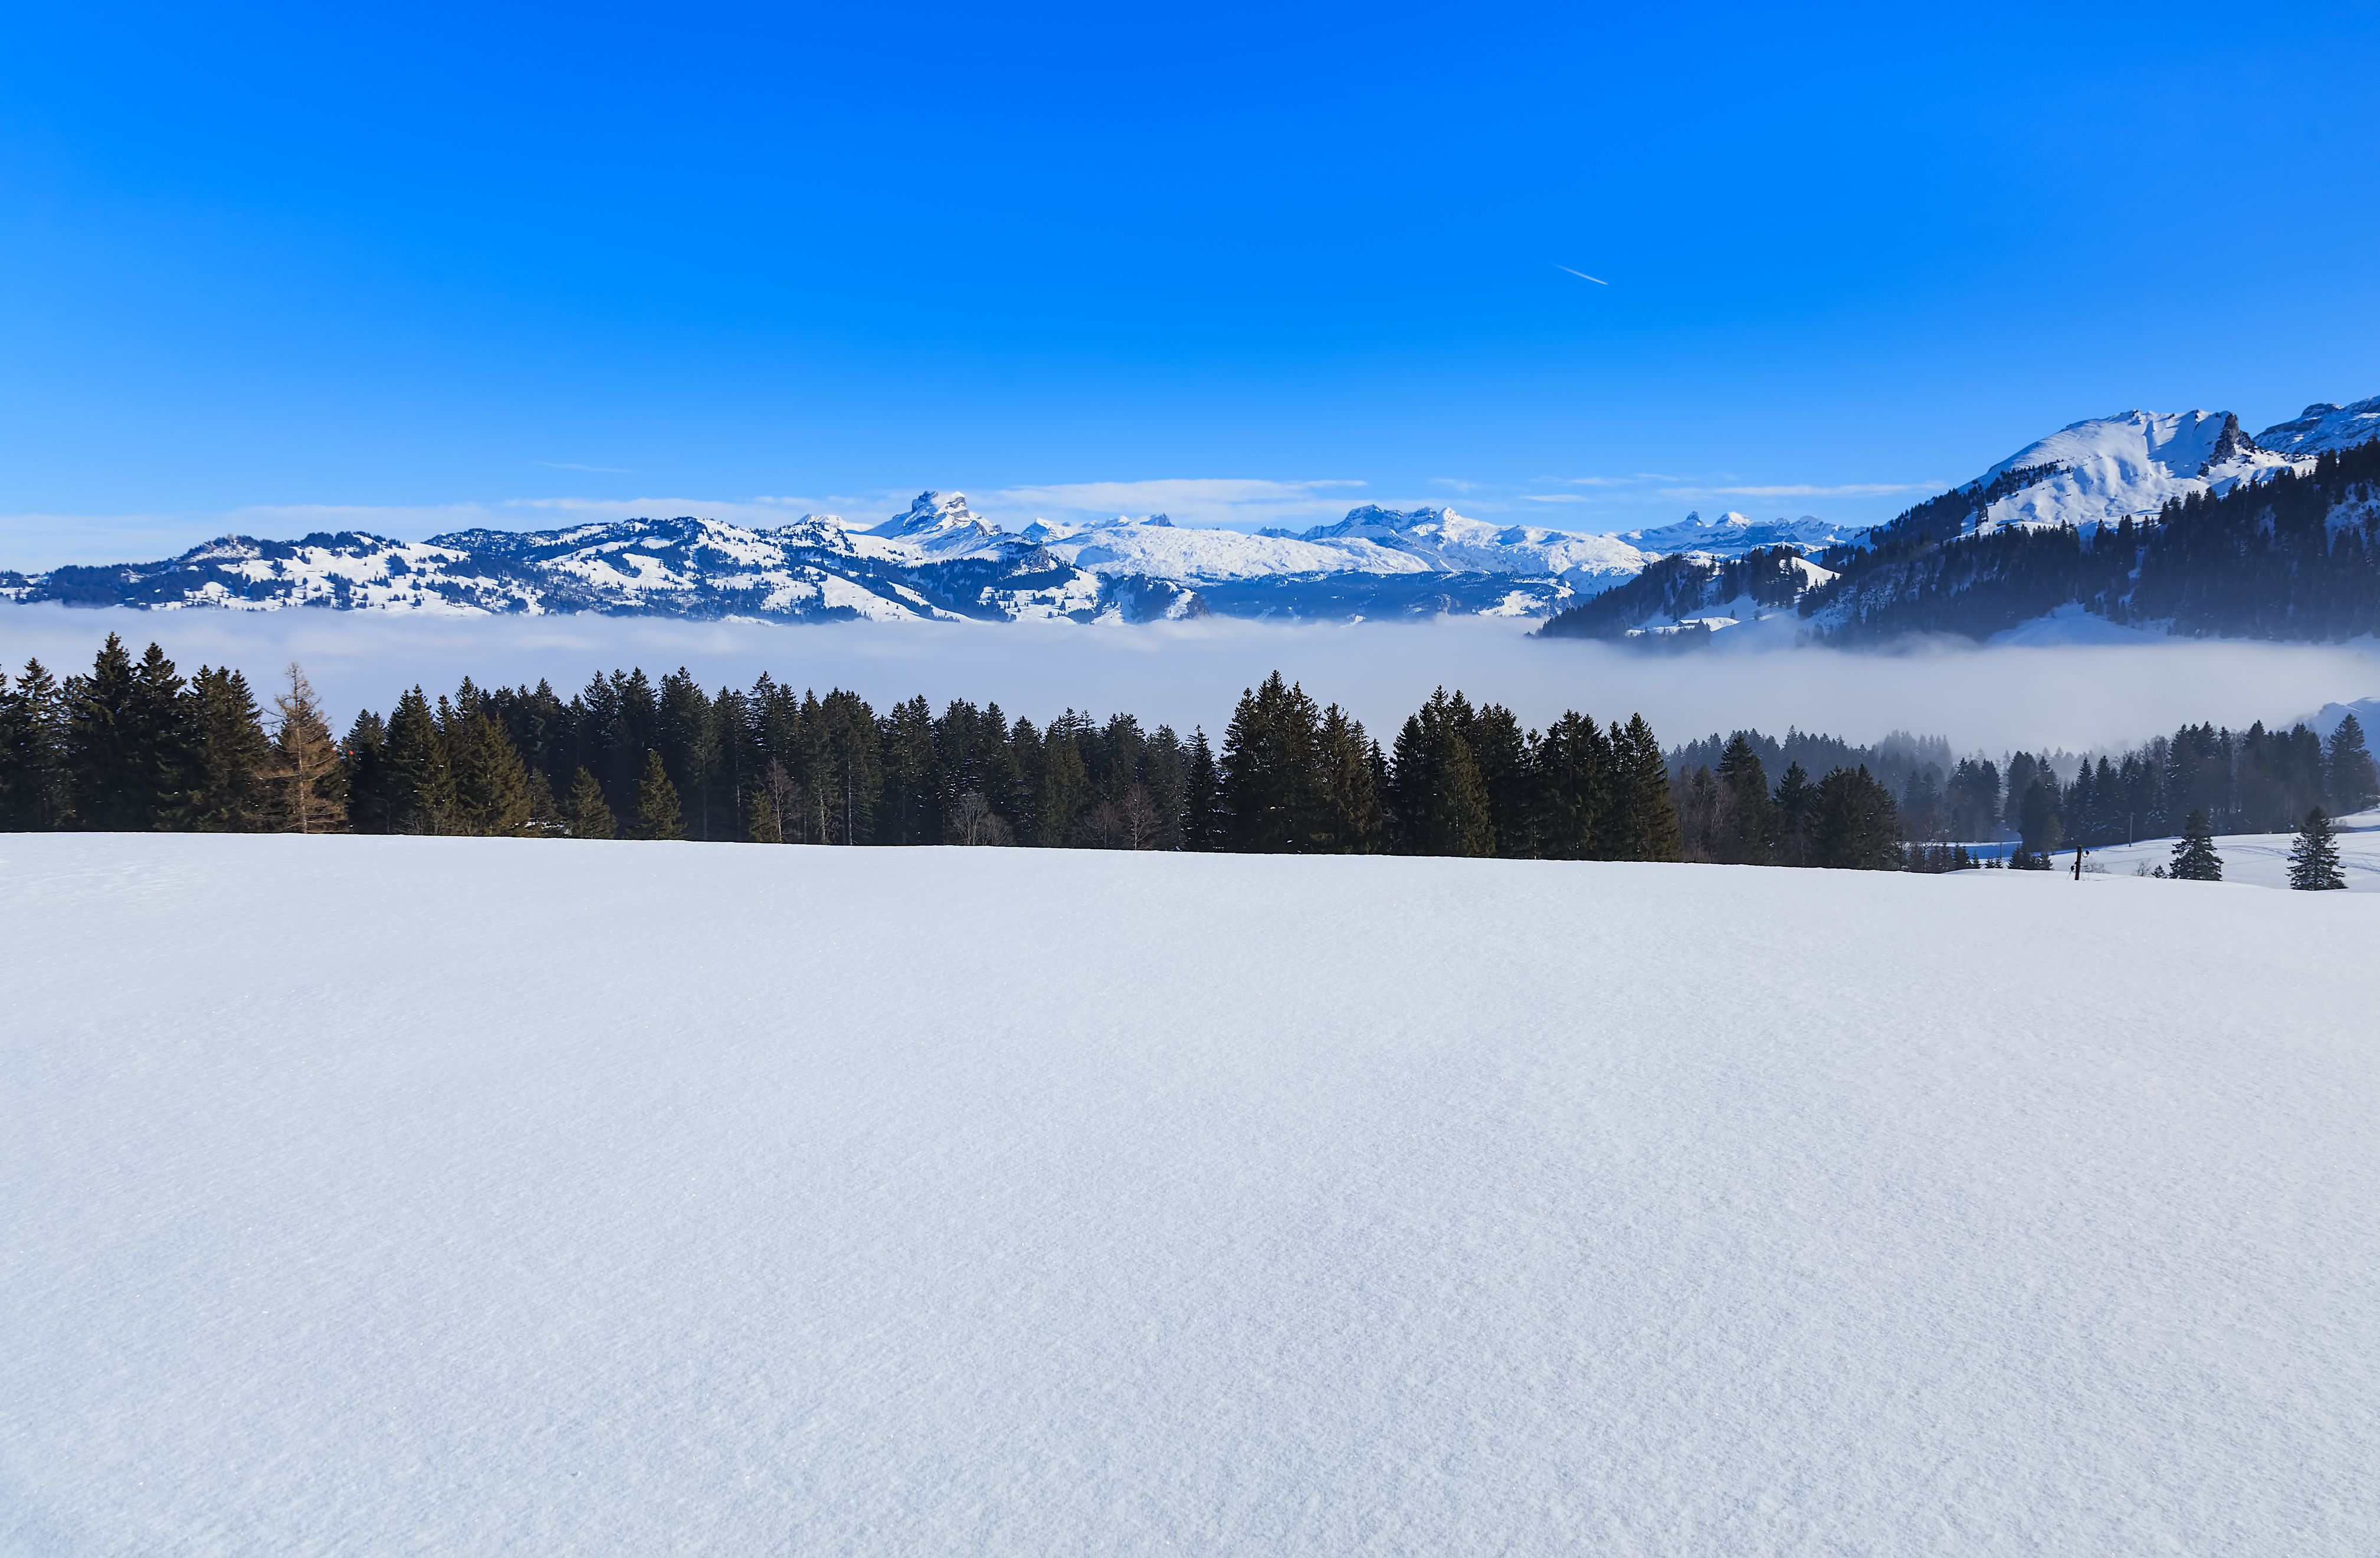 Summits of the Swiss Alps rising from sea of fog in winter, view from the village of Stoos in the Swiss canton of Schwyz.